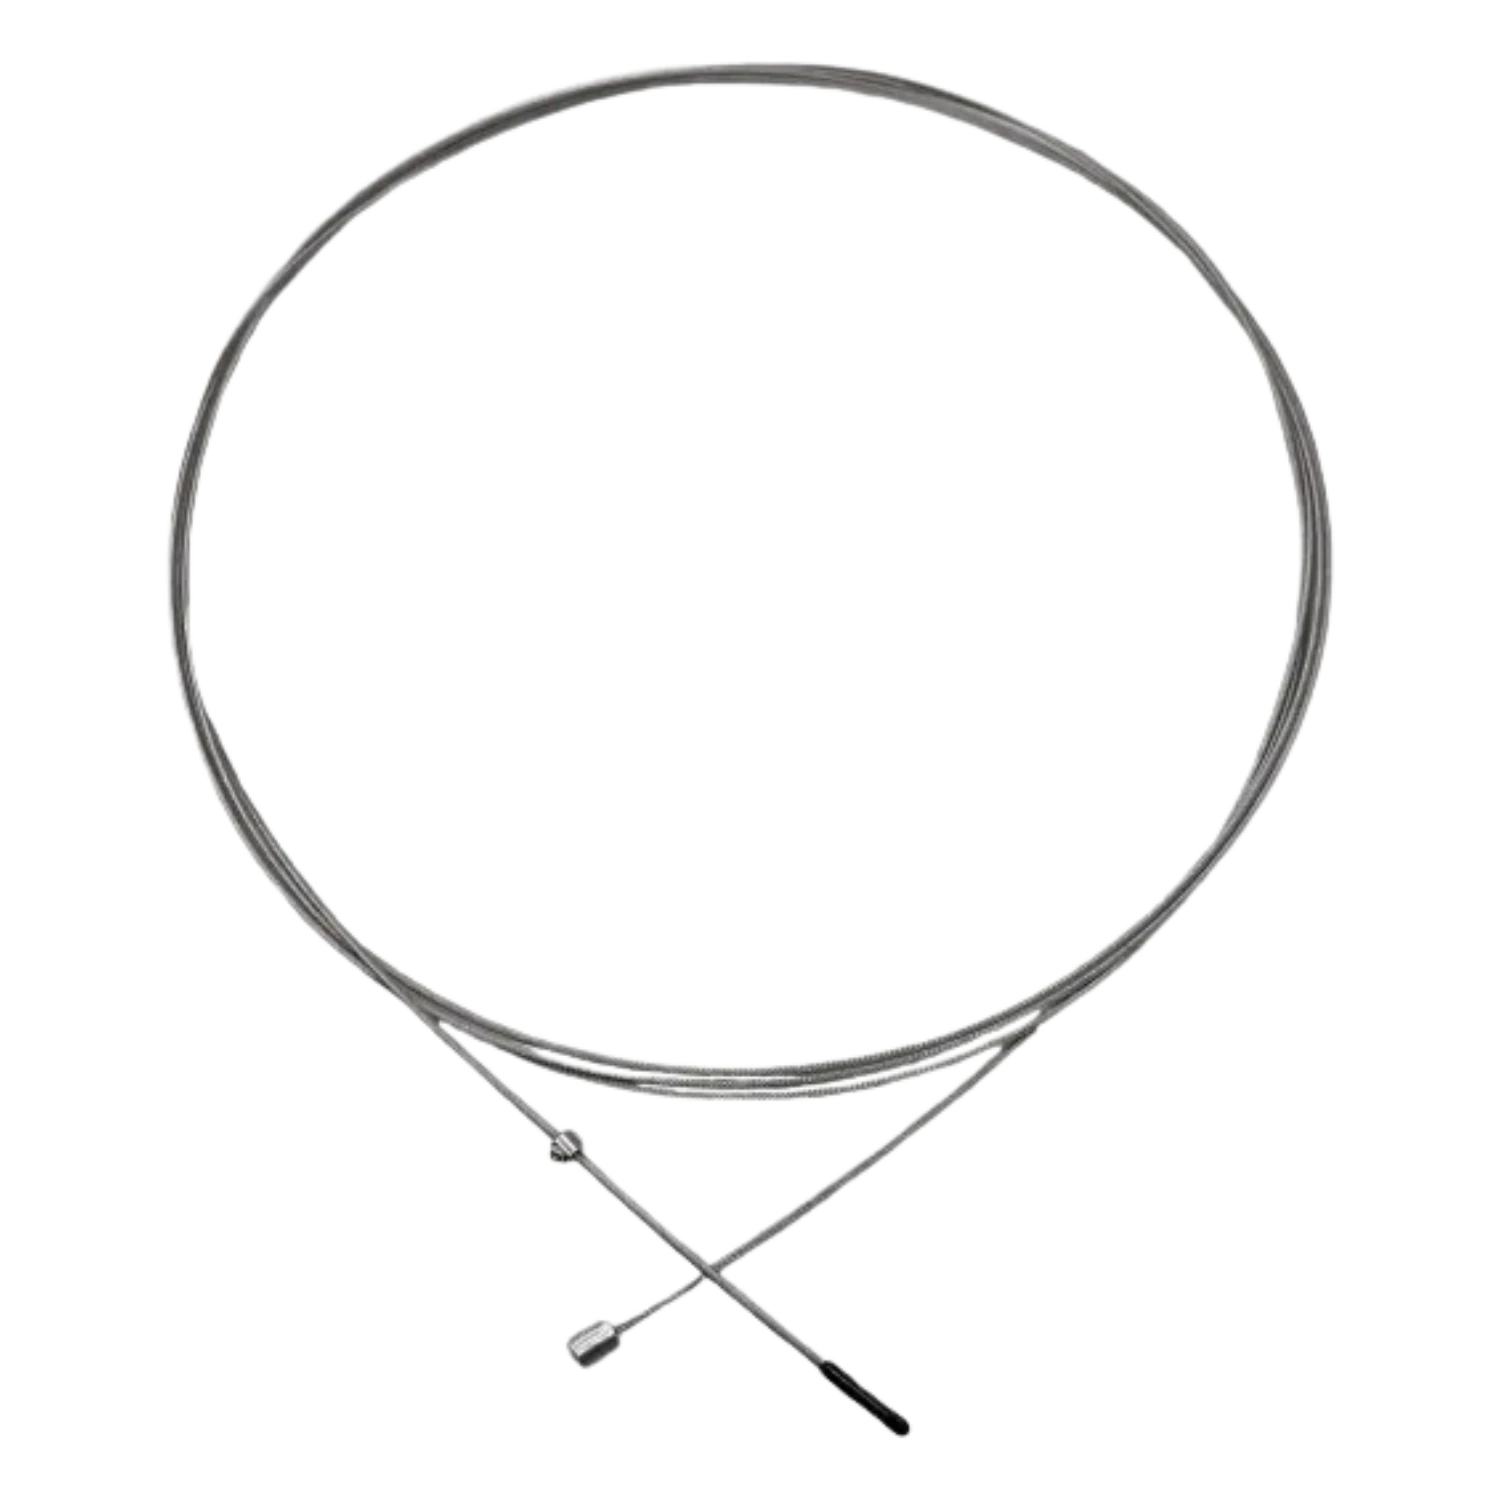 1.6MM BARE BRAIDED STEEL CABLE